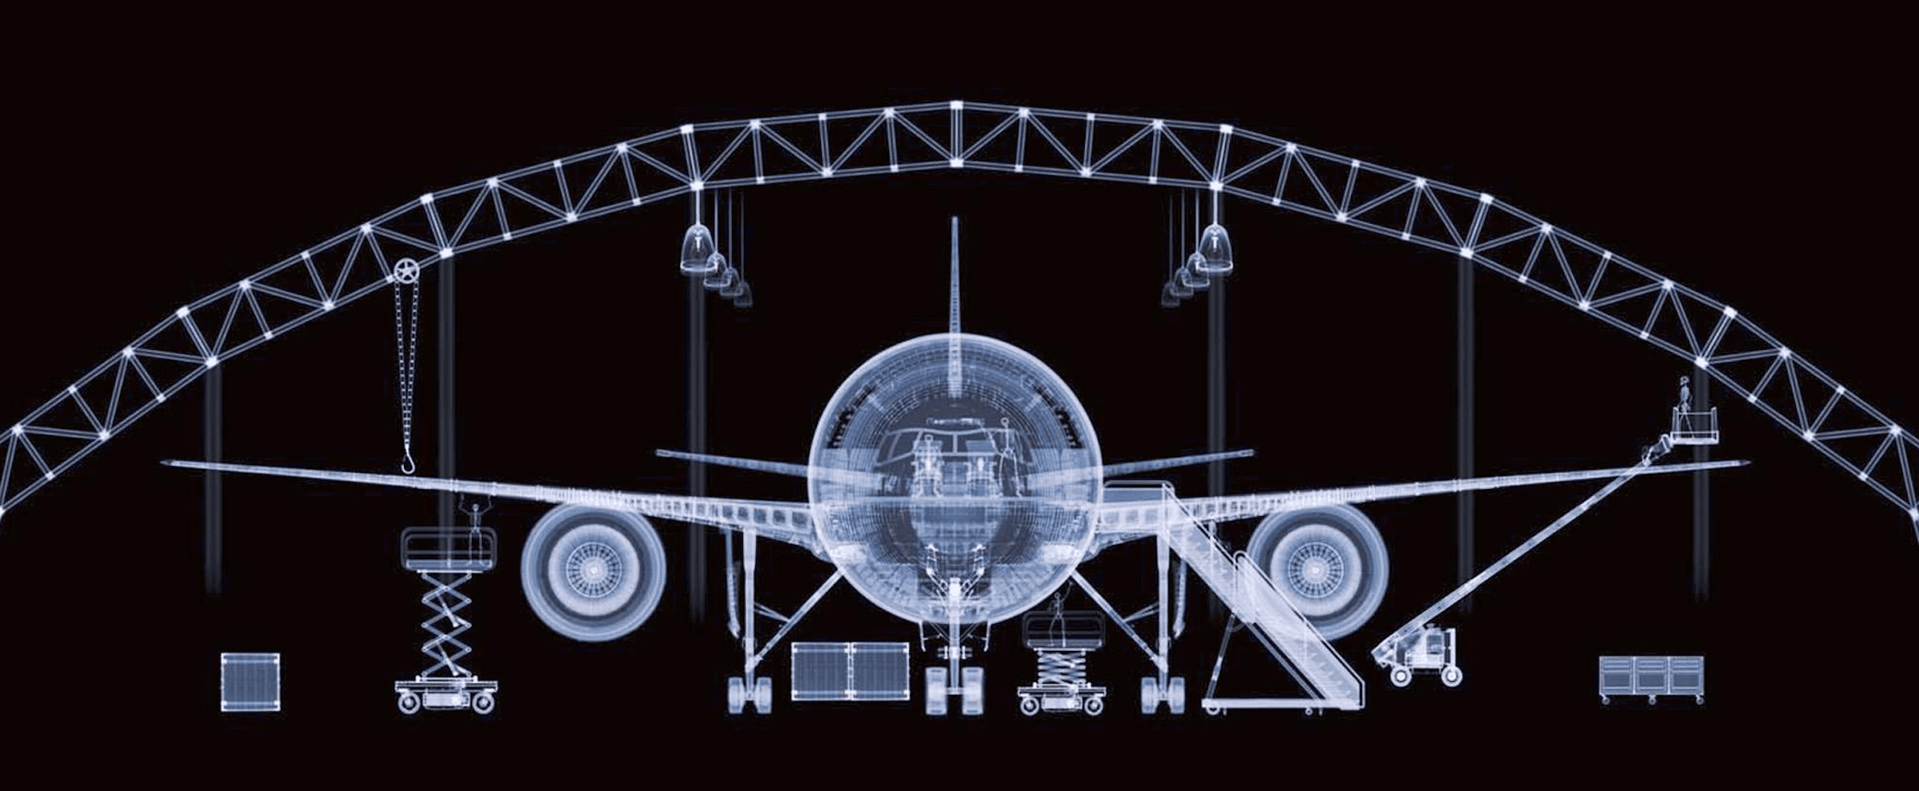 Plane by Nick Veasey